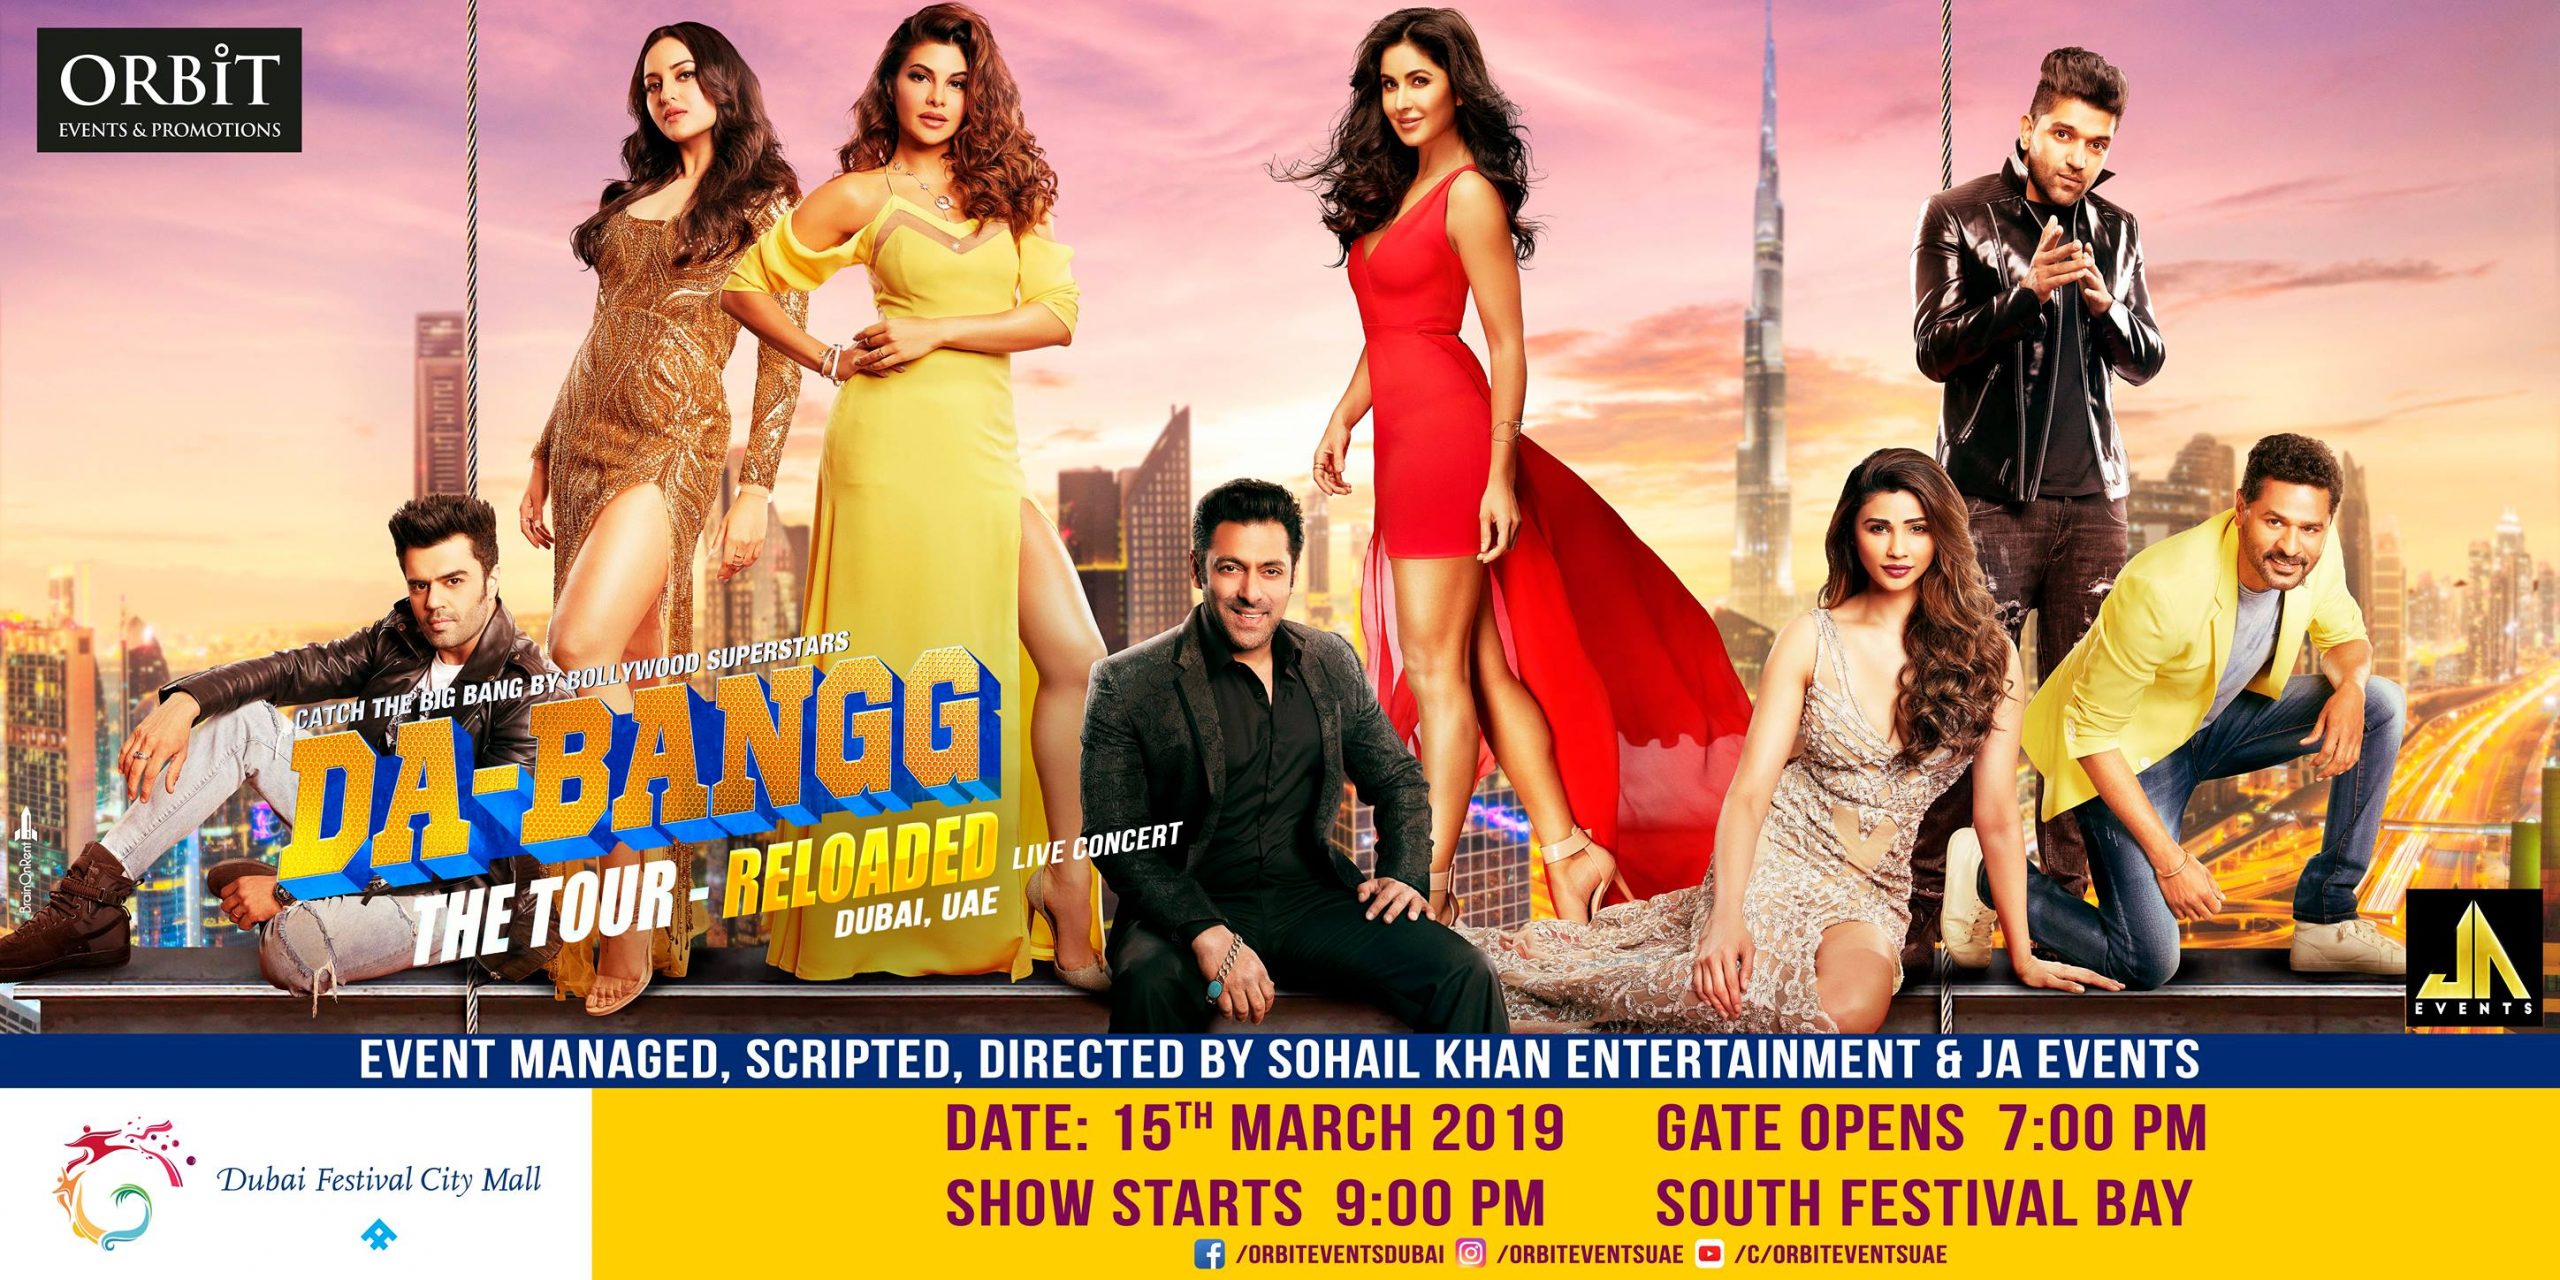 Dabangg – The Tour Reloaded Live Concert - Coming Soon in UAE